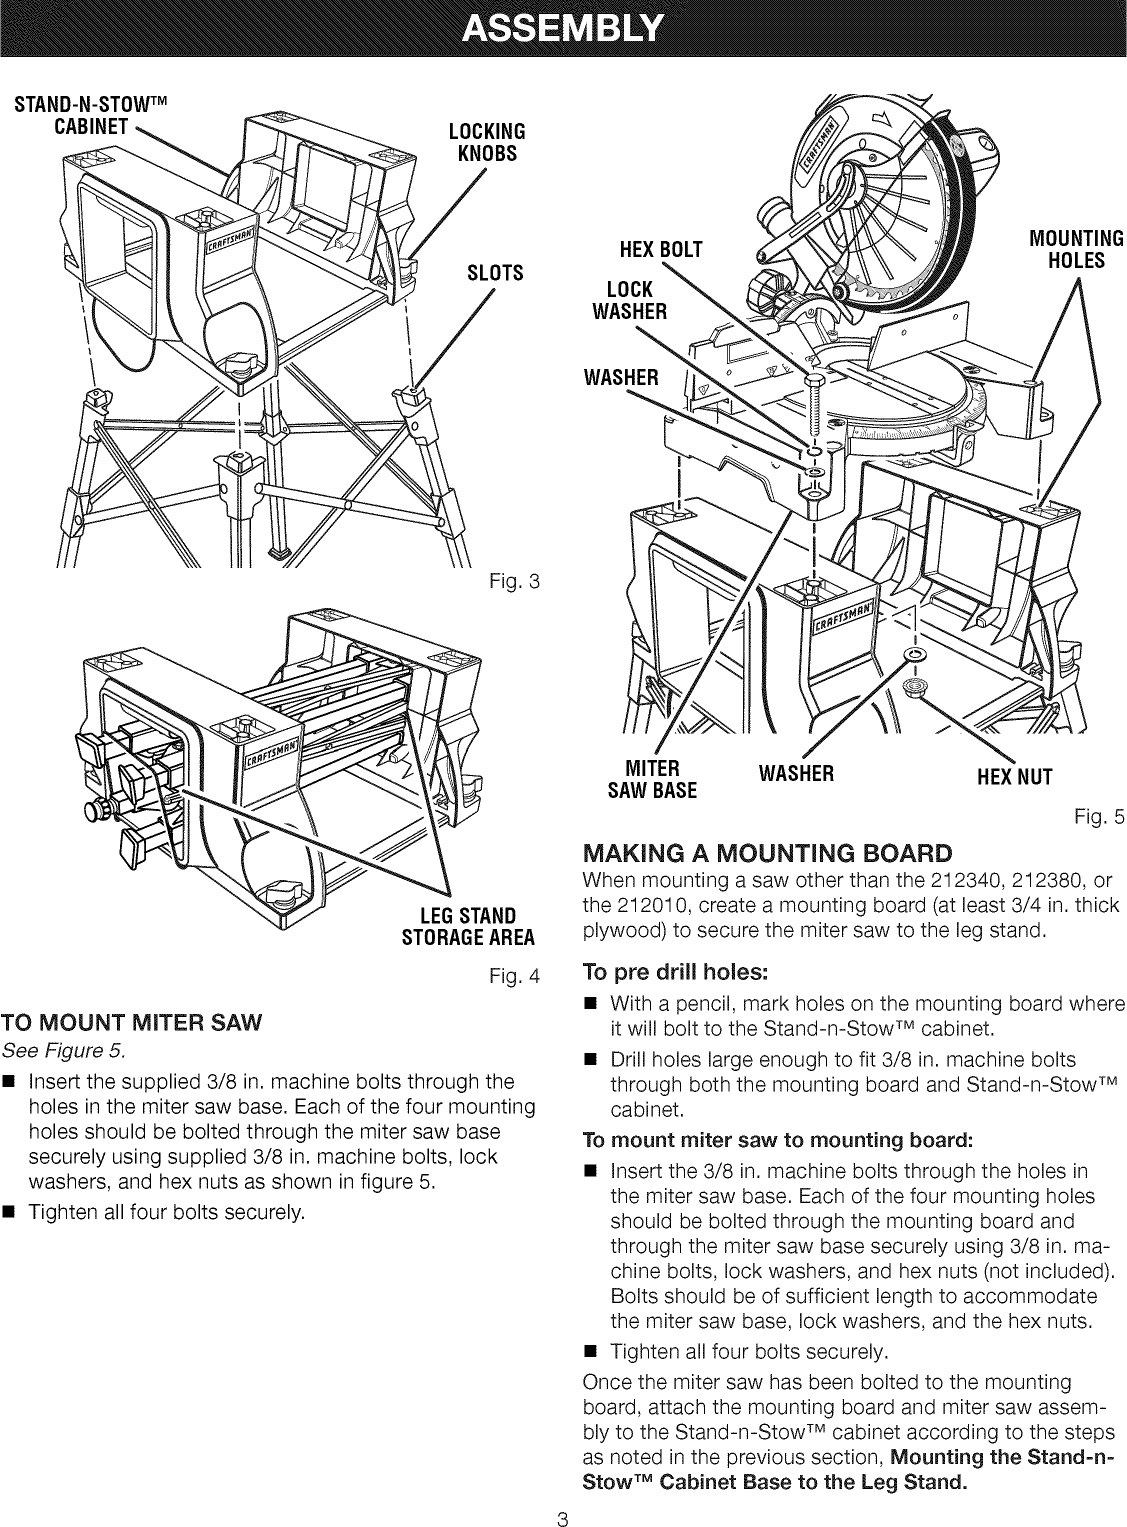 Page 3 of 6 - Craftsman 315223400 User Manual  STAND-N-STOW CABINET - Manuals And Guides L0905113